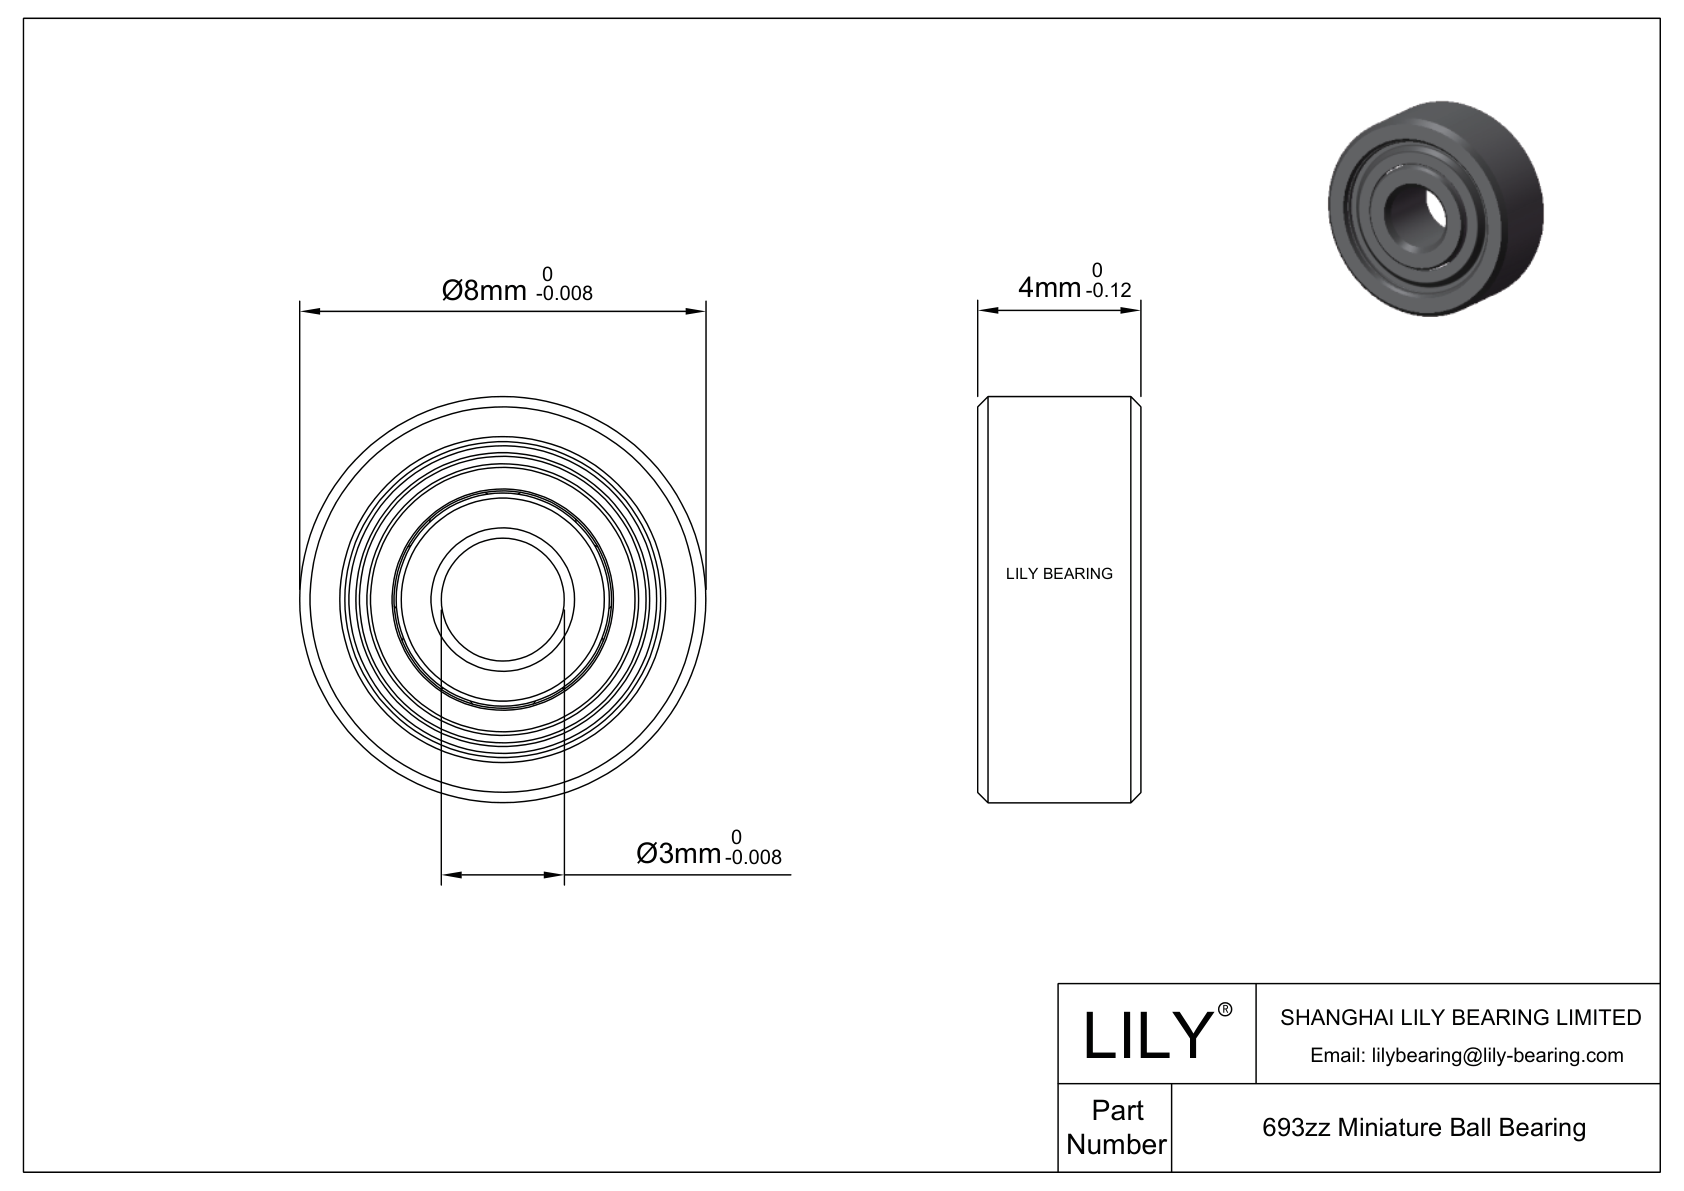 LILY-BS69312-4 POM Coated Bearing cad drawing